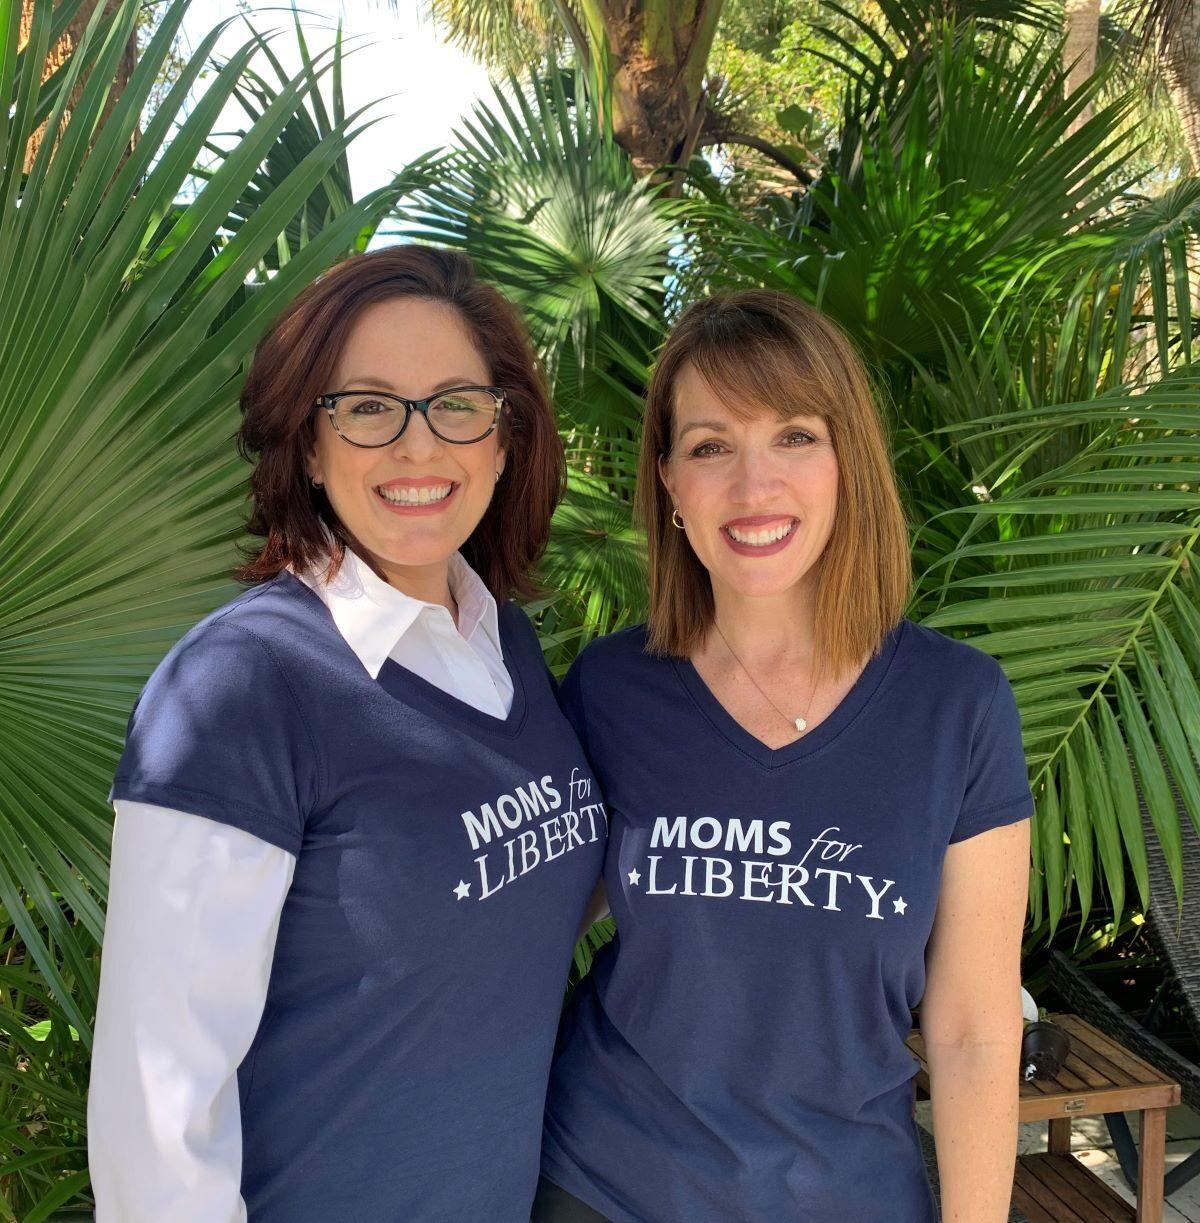 Tiffany Justice (L) and Tina Descovich (R), co-founders of Moms for Liberty. (Courtesy of Moms for Liberty)